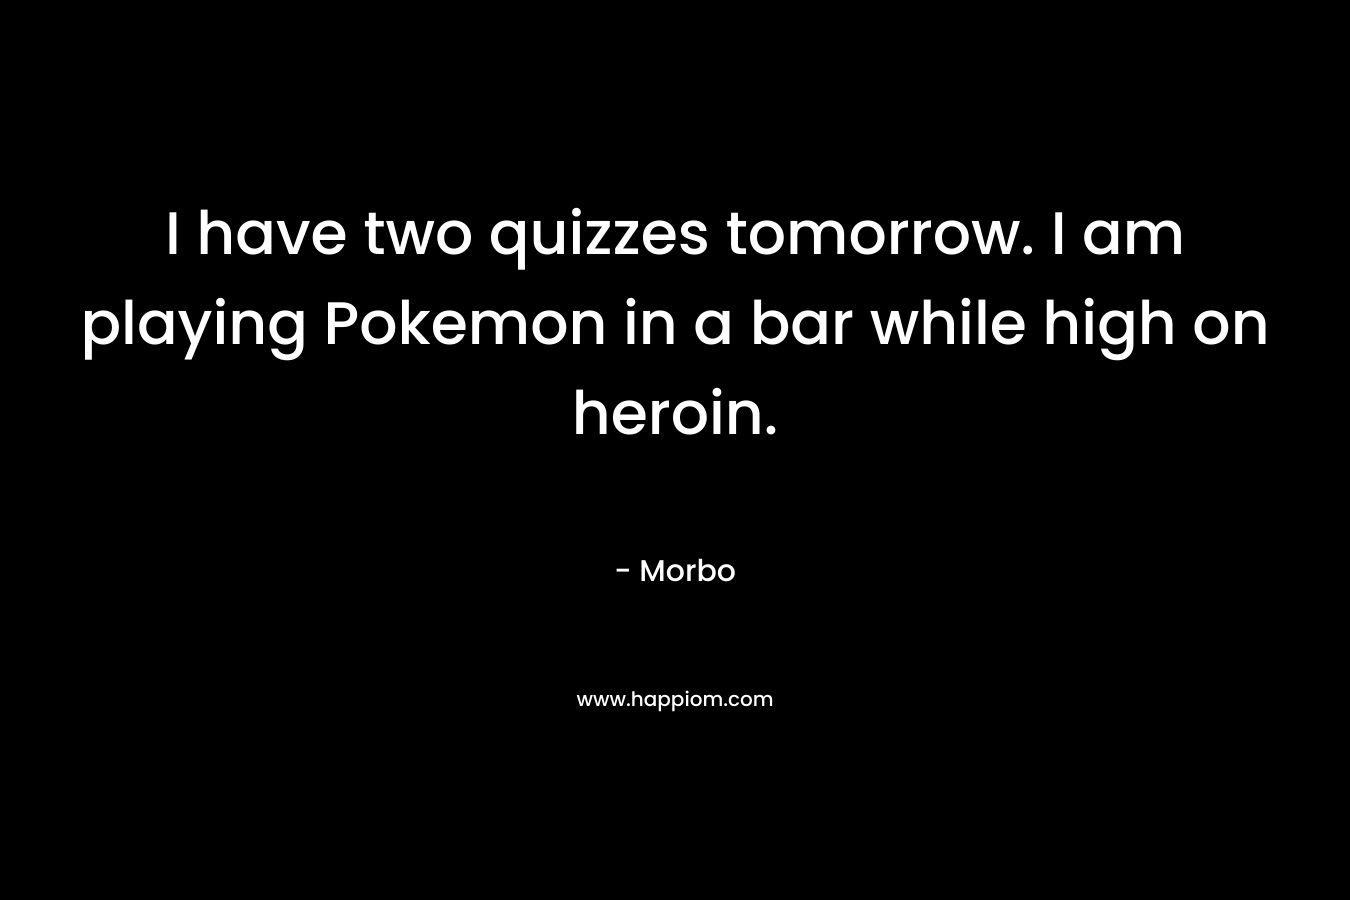 I have two quizzes tomorrow. I am playing Pokemon in a bar while high on heroin. – Morbo